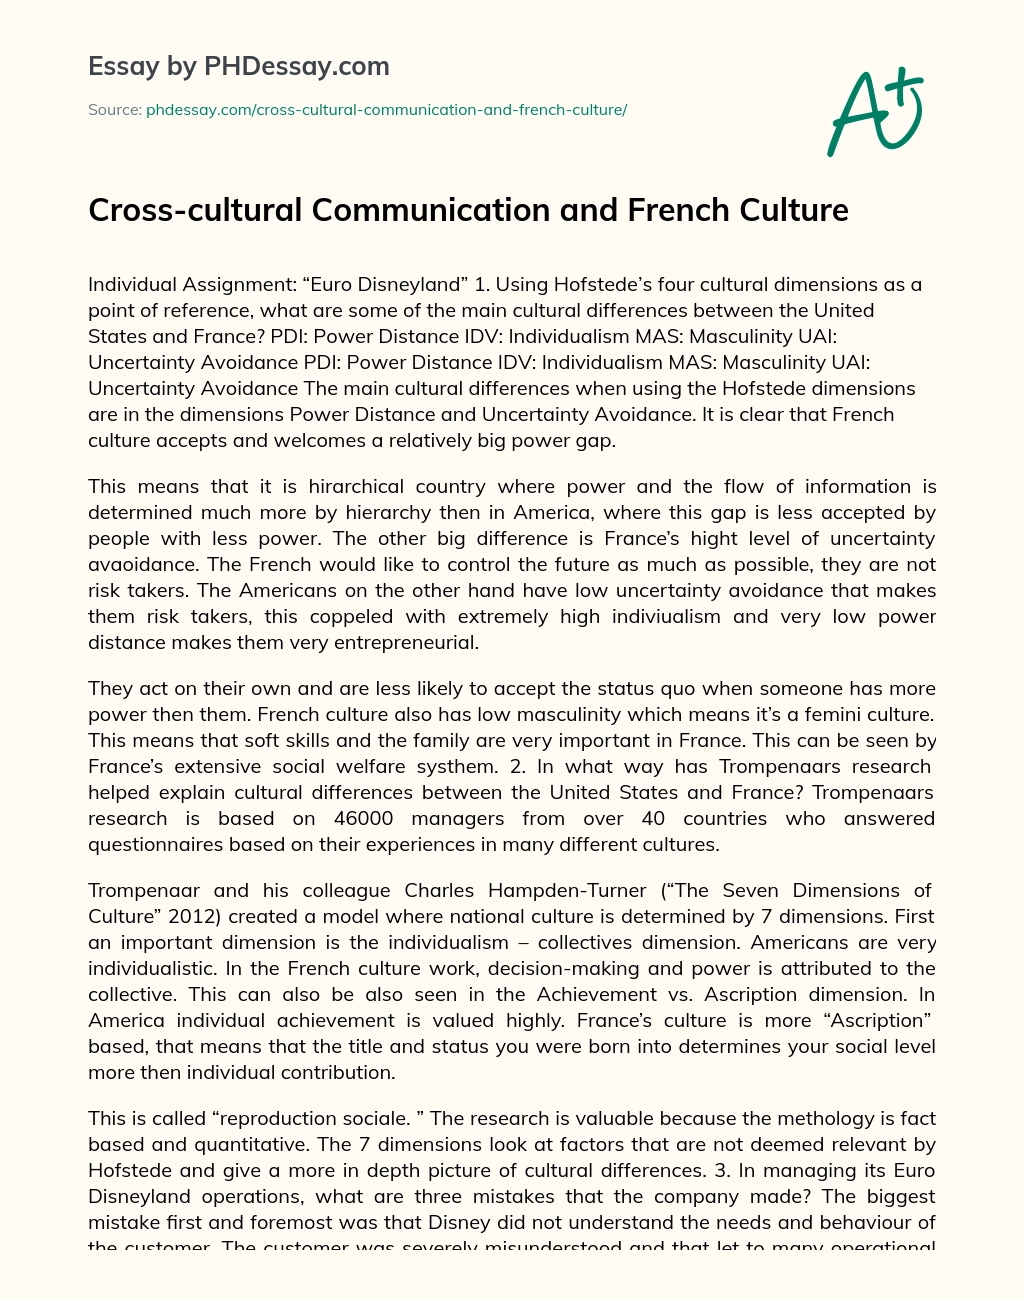 Cross-cultural Communication and French Culture essay